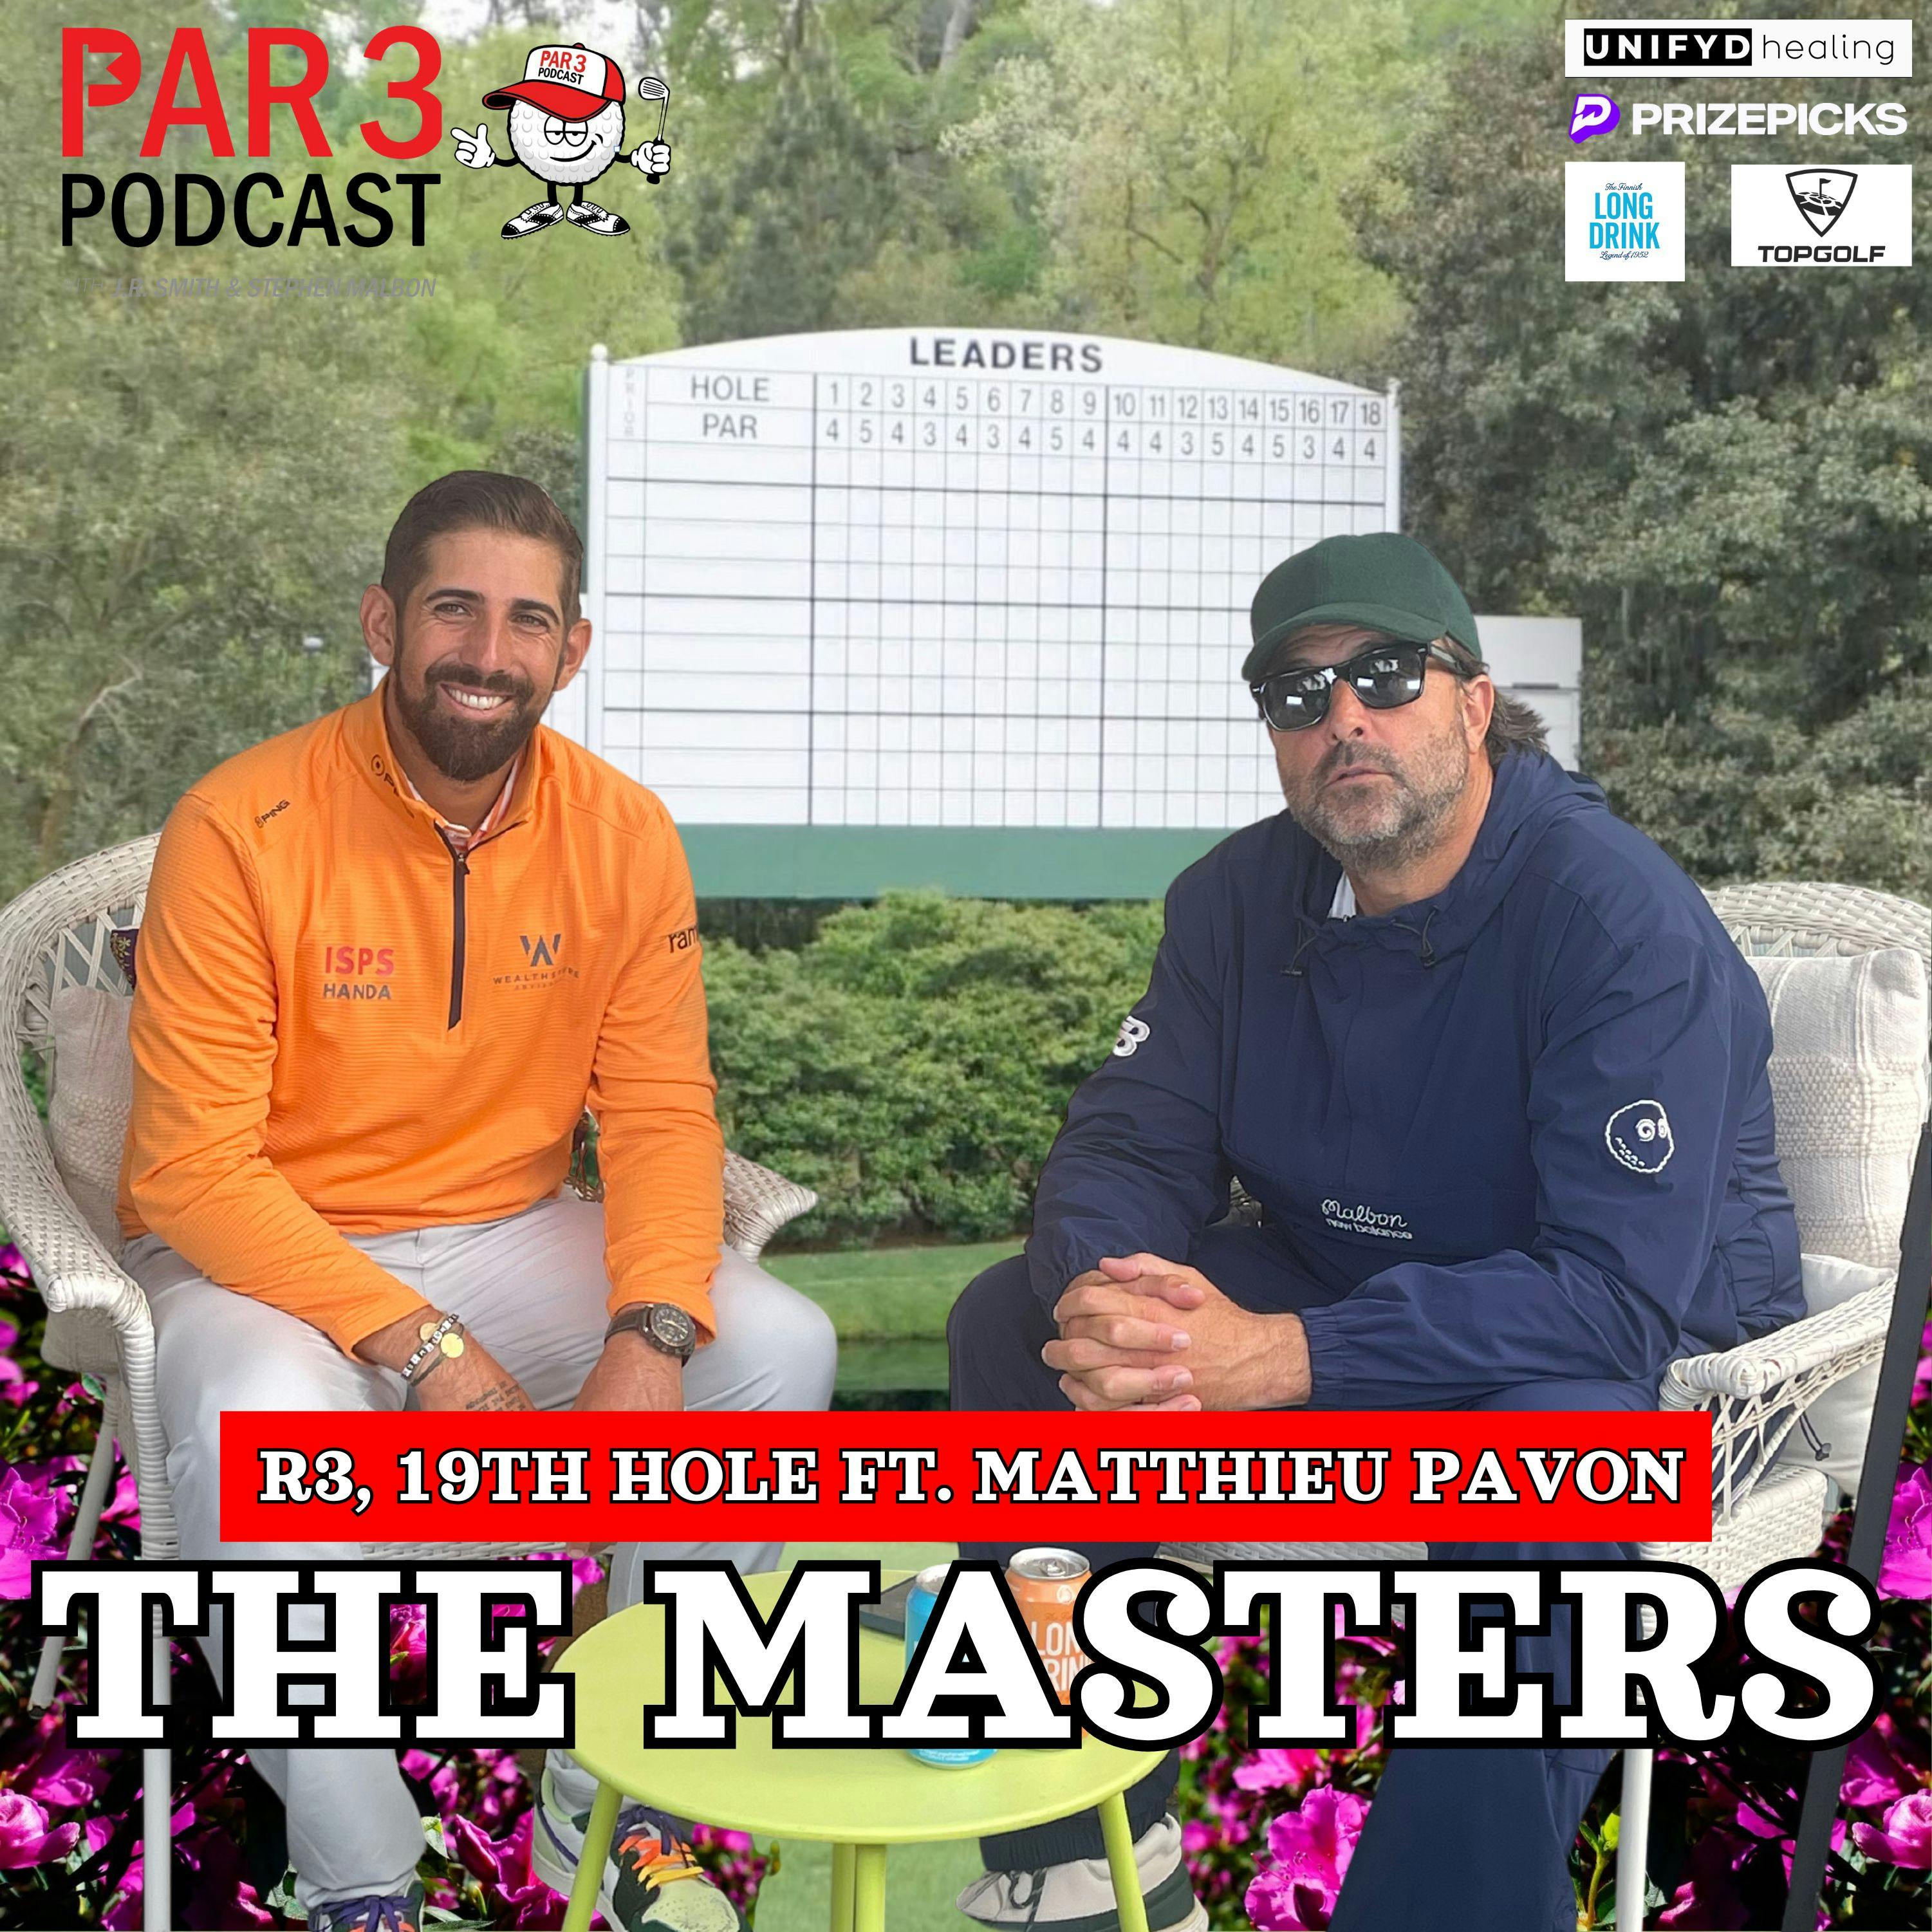 AUGUSTA R3, THE 19th HOLE: Matthieu Pavon on PGA Tour Journey, Winning At Torrey Pines, The Masters & Scouting, Playing In Paris Olympics For France